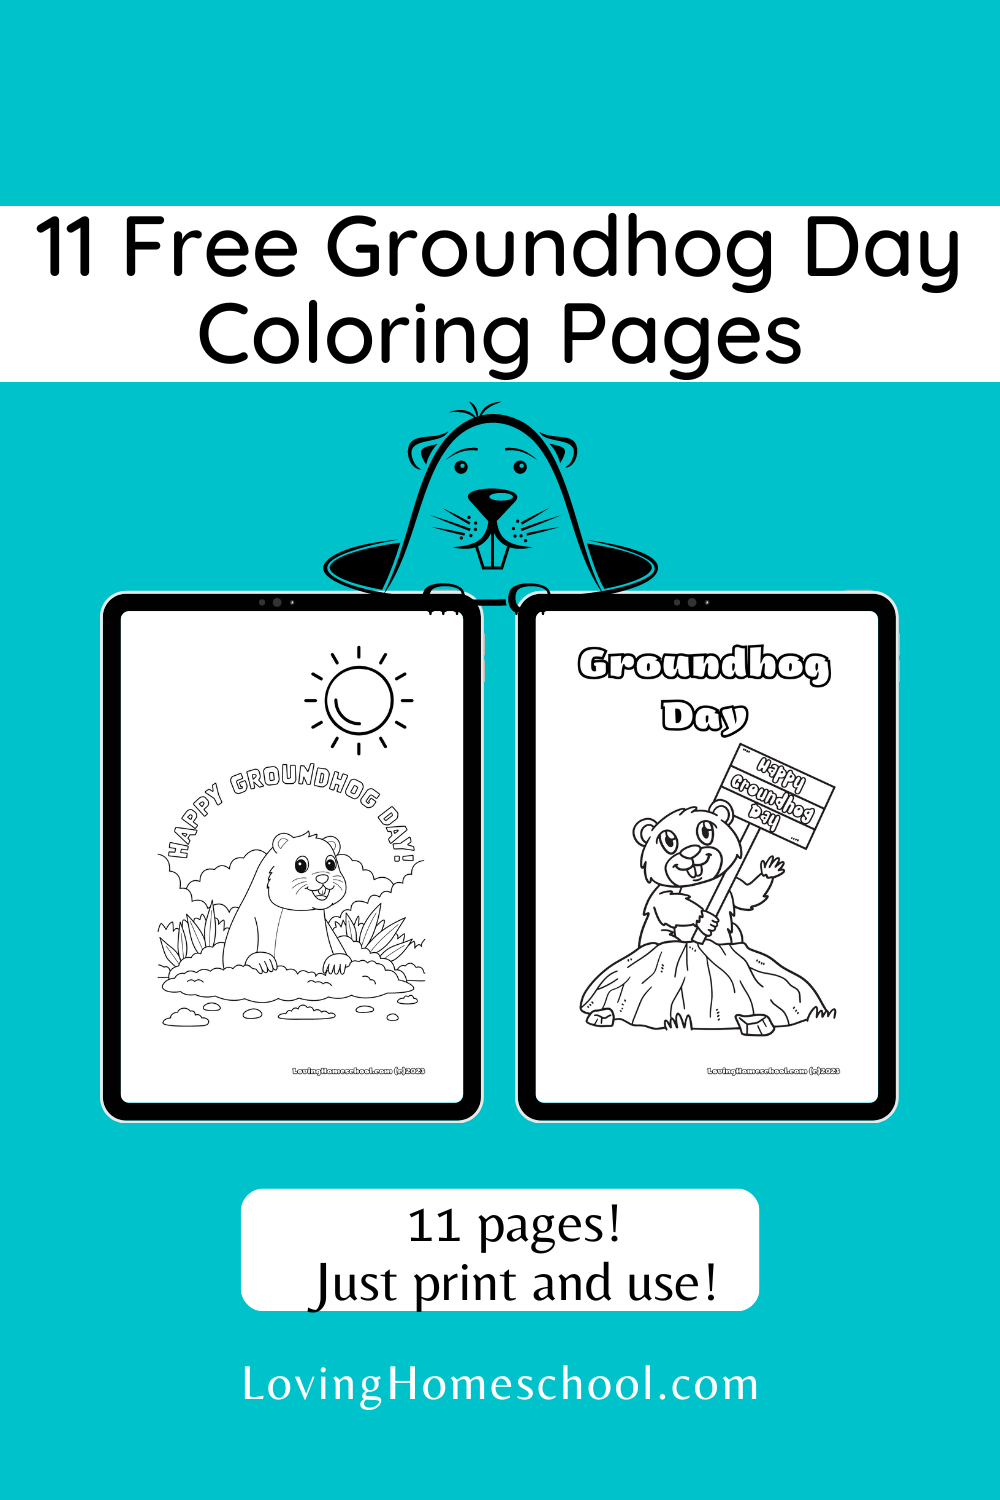 11 Free Groundhog Day Coloring Pages Pinterest Pin